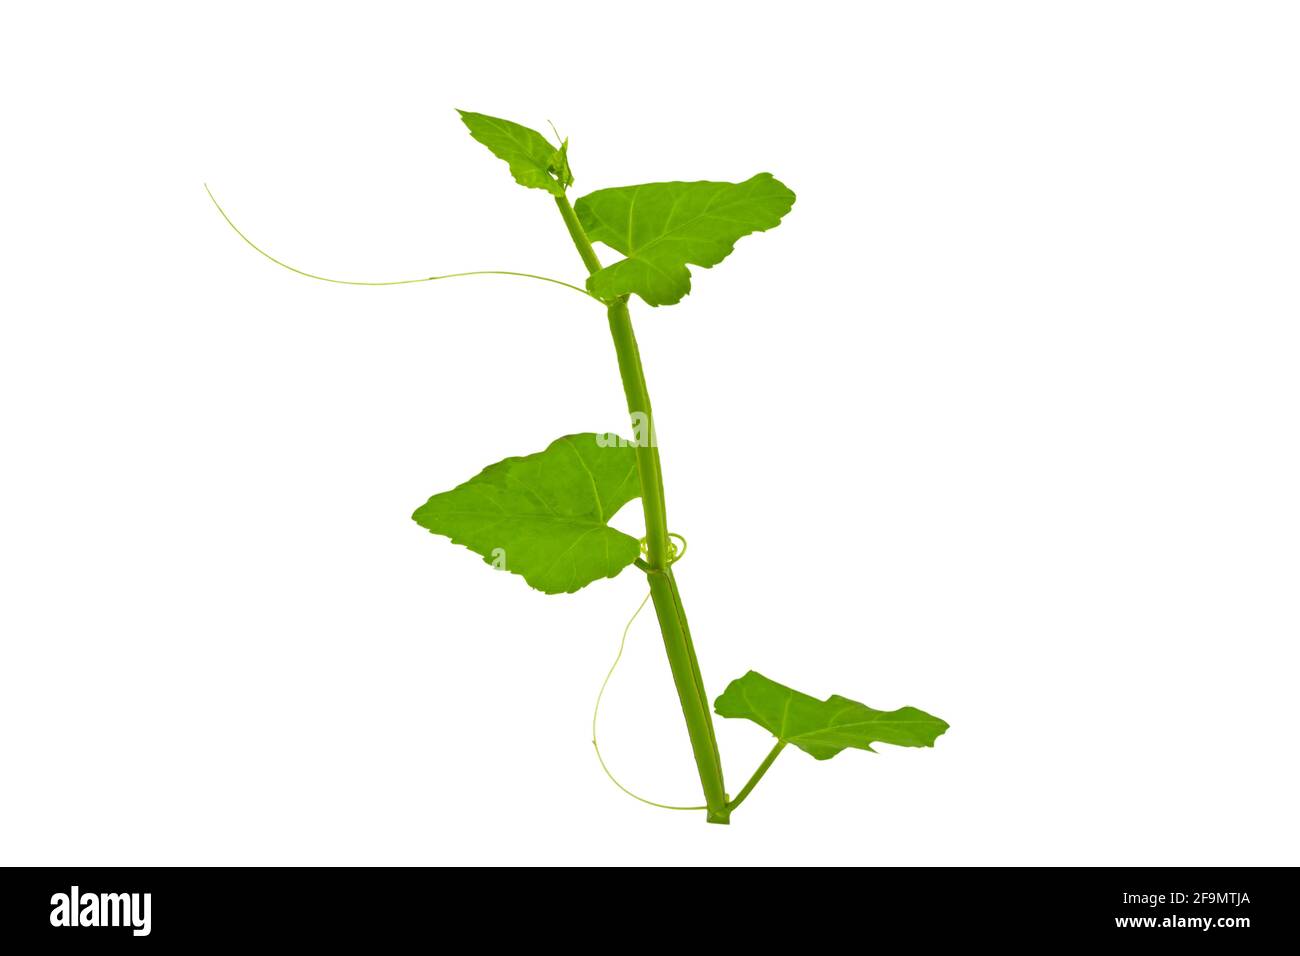 lose up fresh of Cissus Quadrangularis Linn.( Edible - Stemed Vine ) herb for pain treatment on white background.Saved with clipping path. Stock Photo